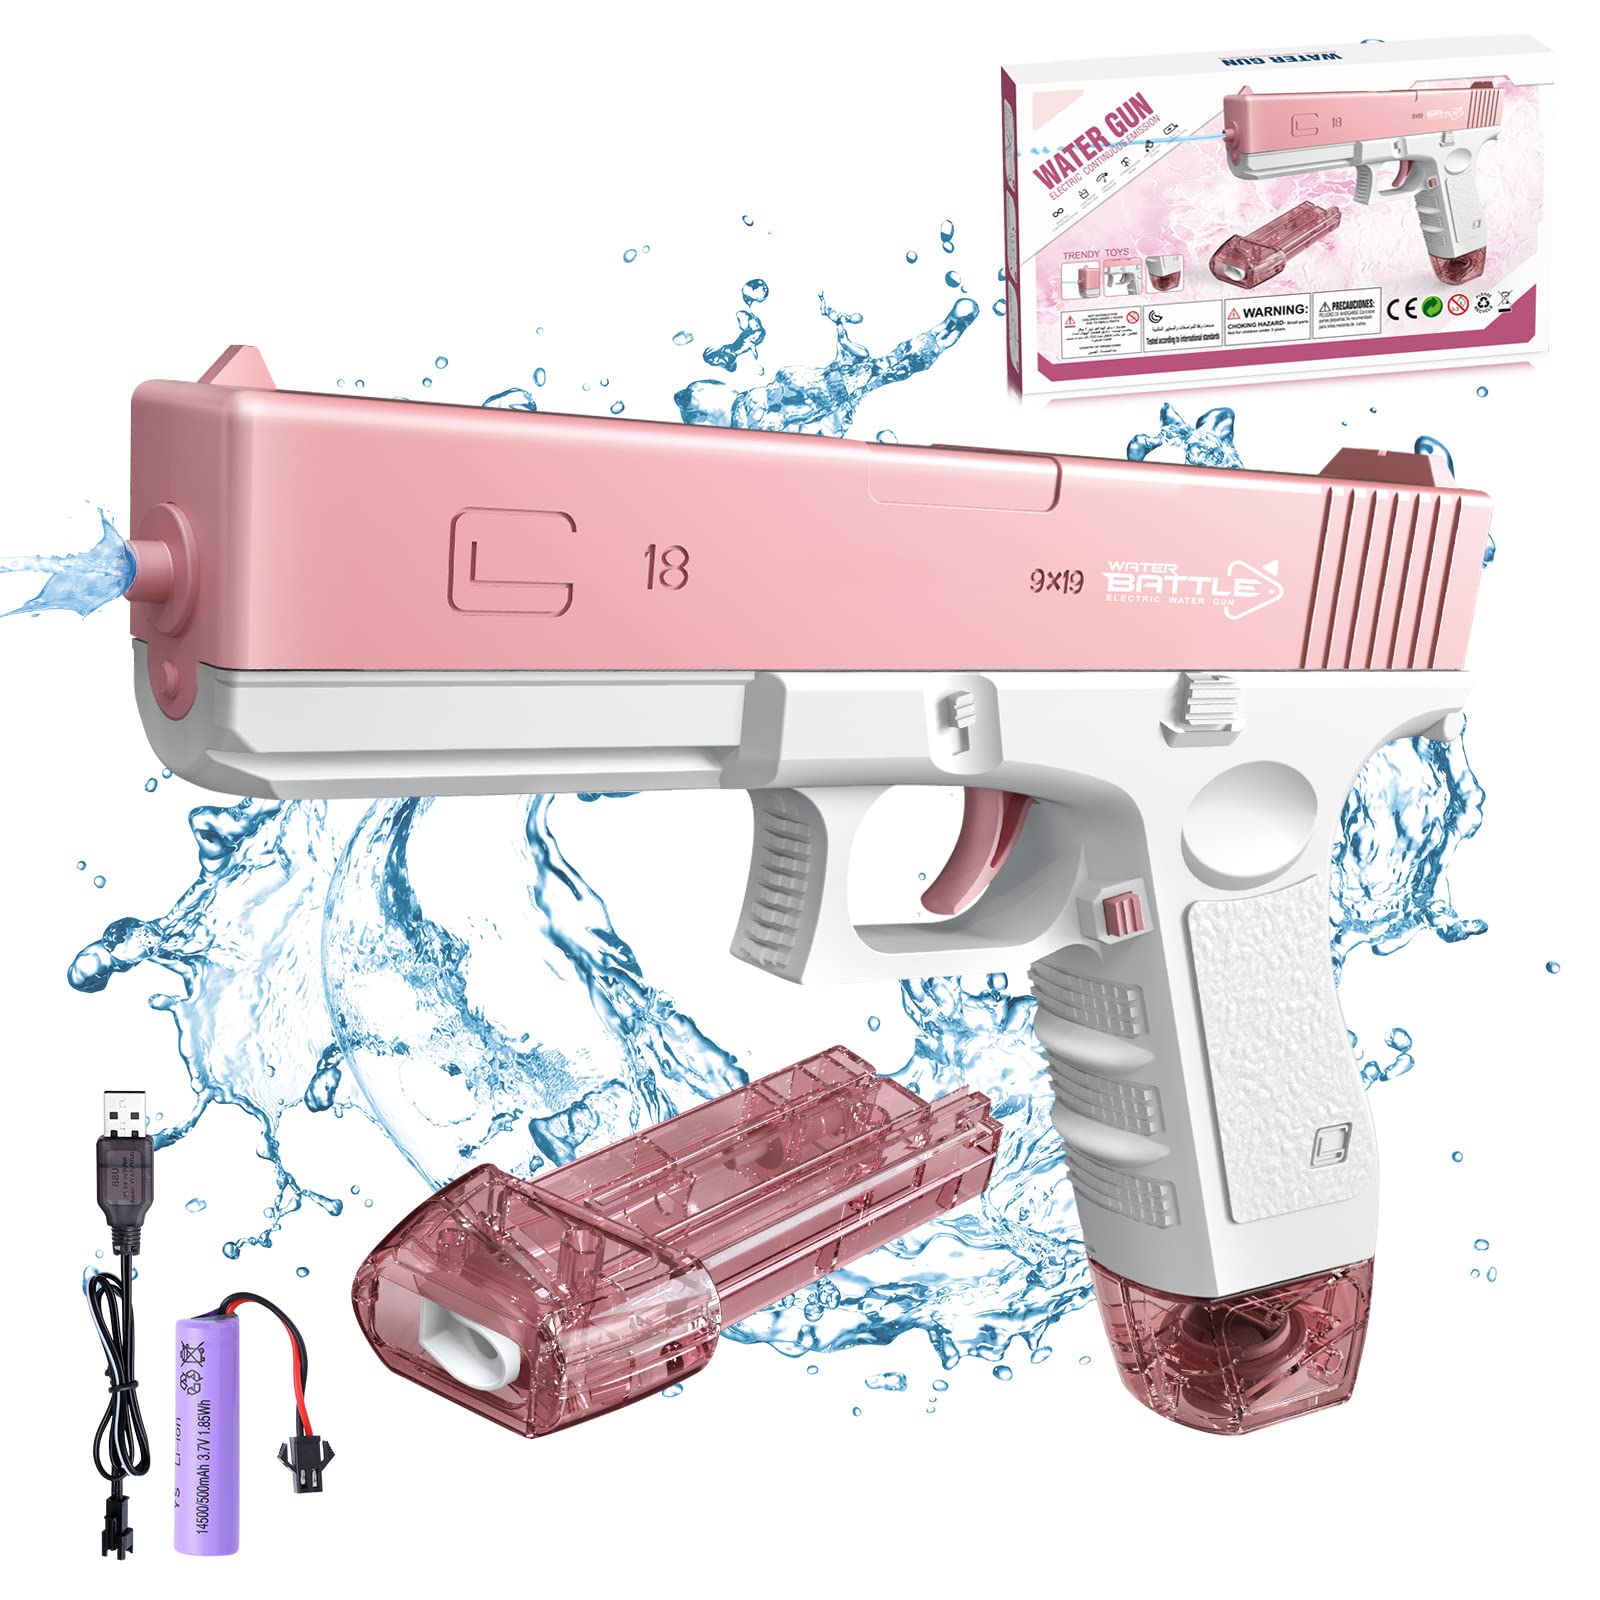 Limited Time Sale 70% OFF🎉Electric Water Gun Toy, Buy 2 Free Shipping